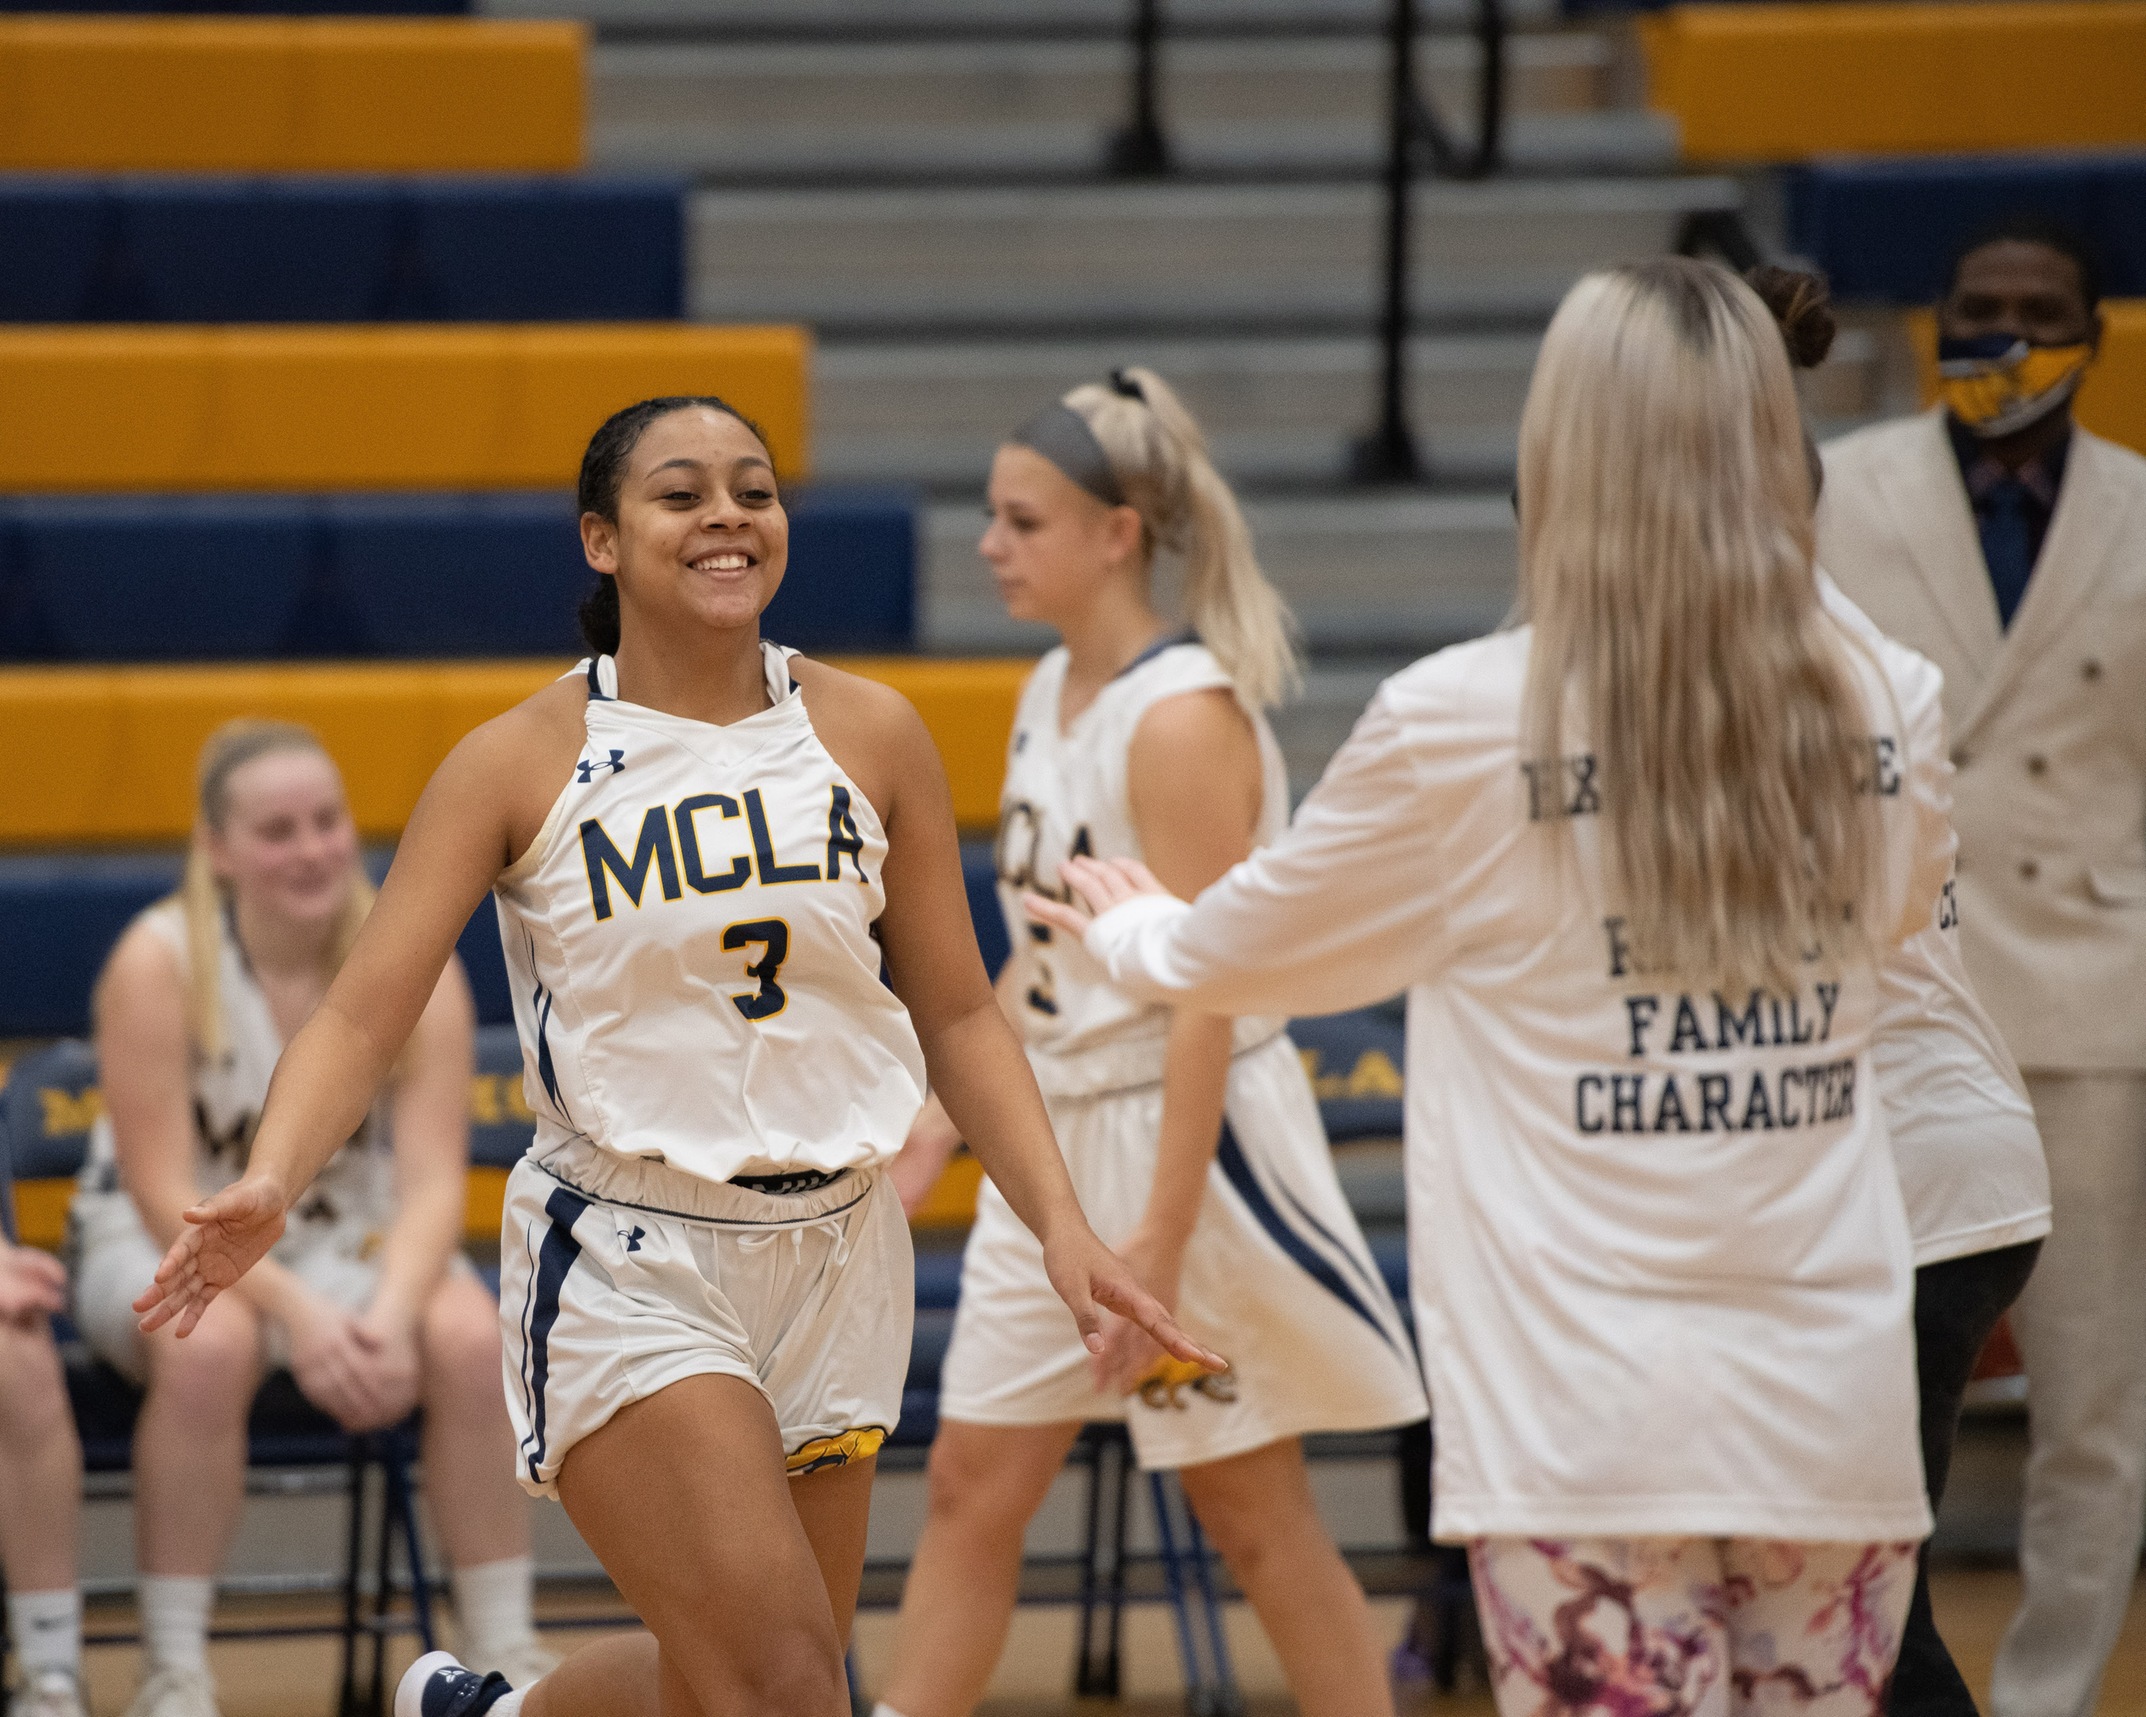 Women's Basketball, Bostick earn win over Fitchburg State 66-59